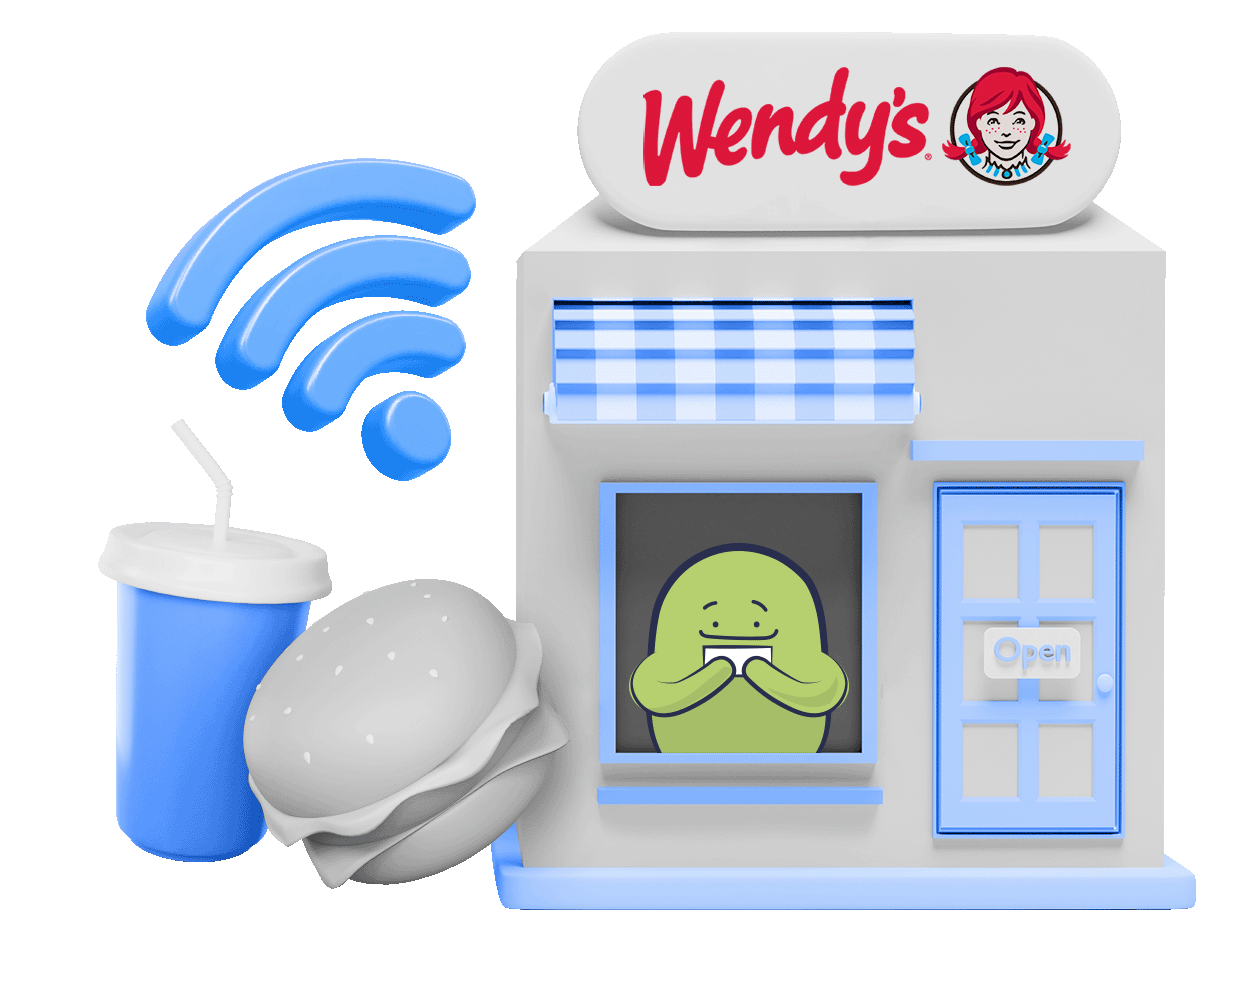 How to connect to Wendy’s WiFi more safely